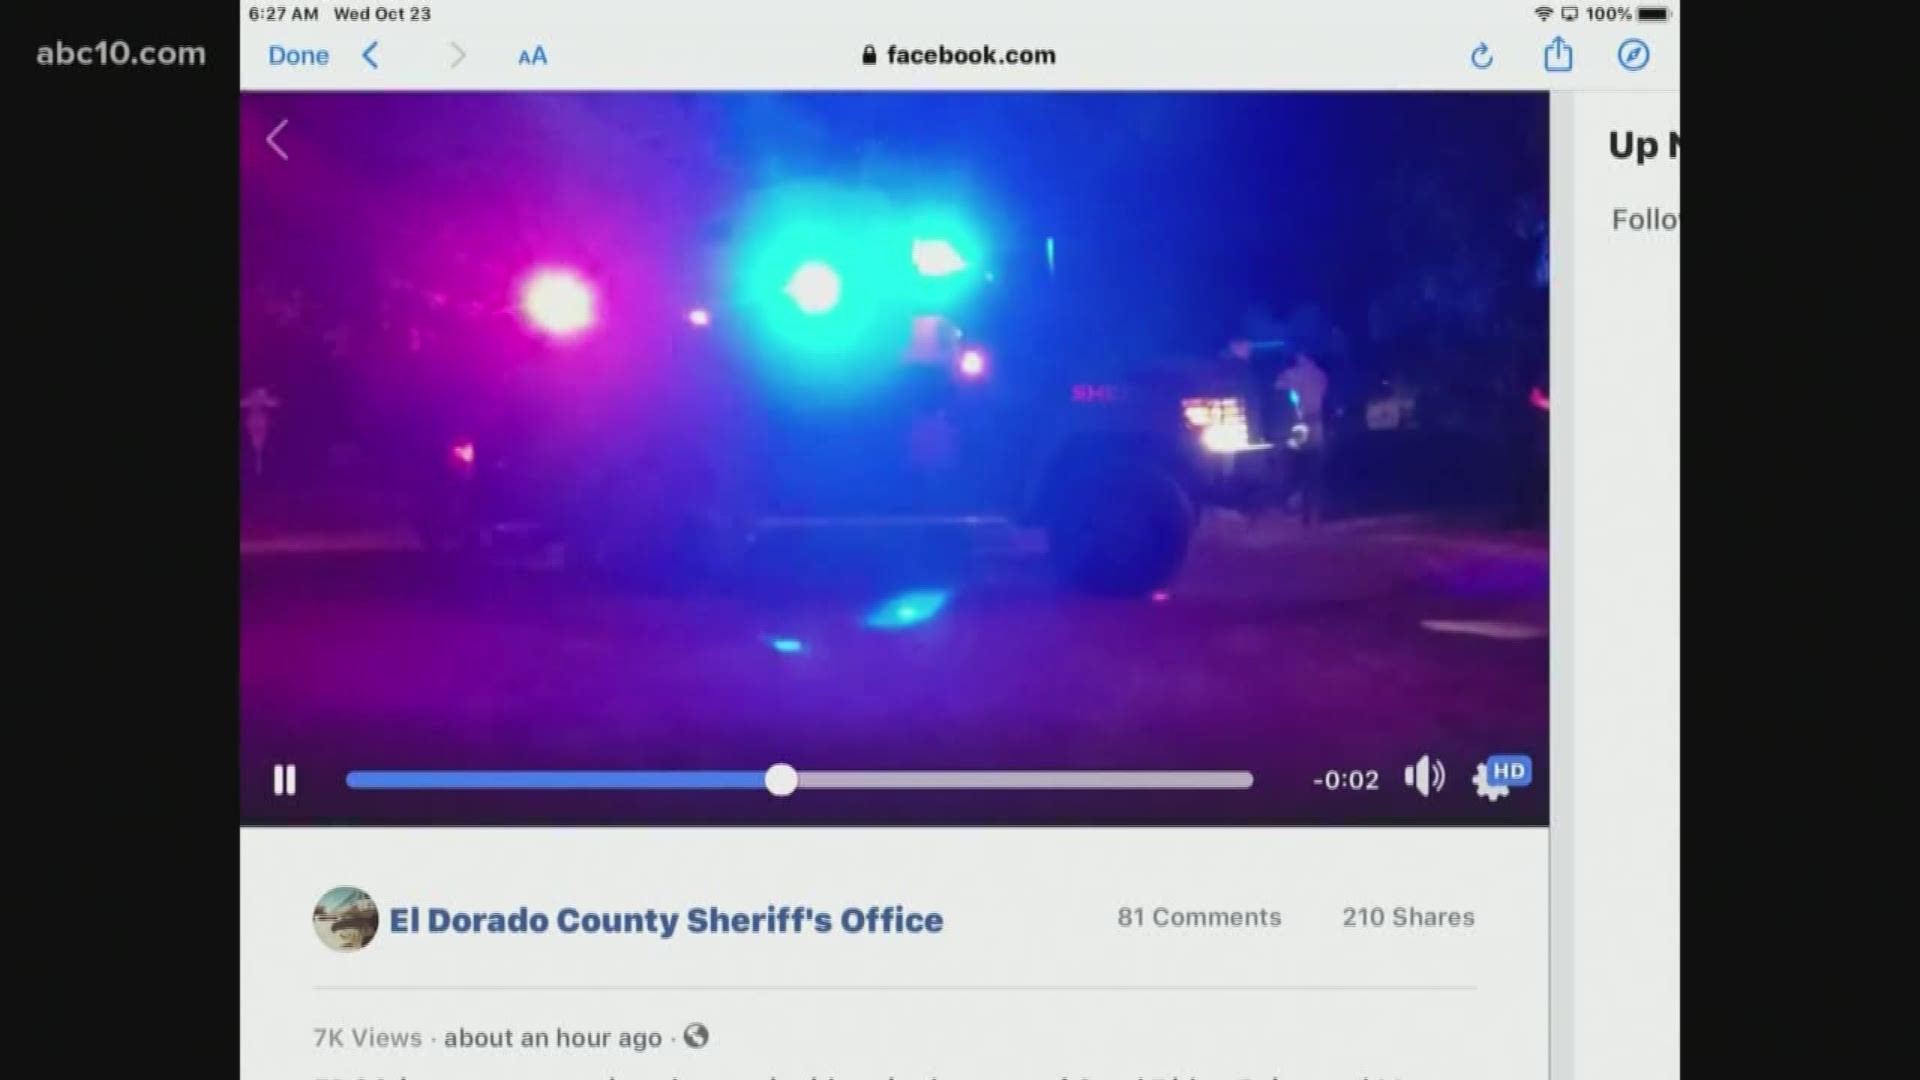 El Dorado County Sheriff's deputies were shot at Wednesday morning while responding to a call for help in a rural area just south of Placerville, the office said.